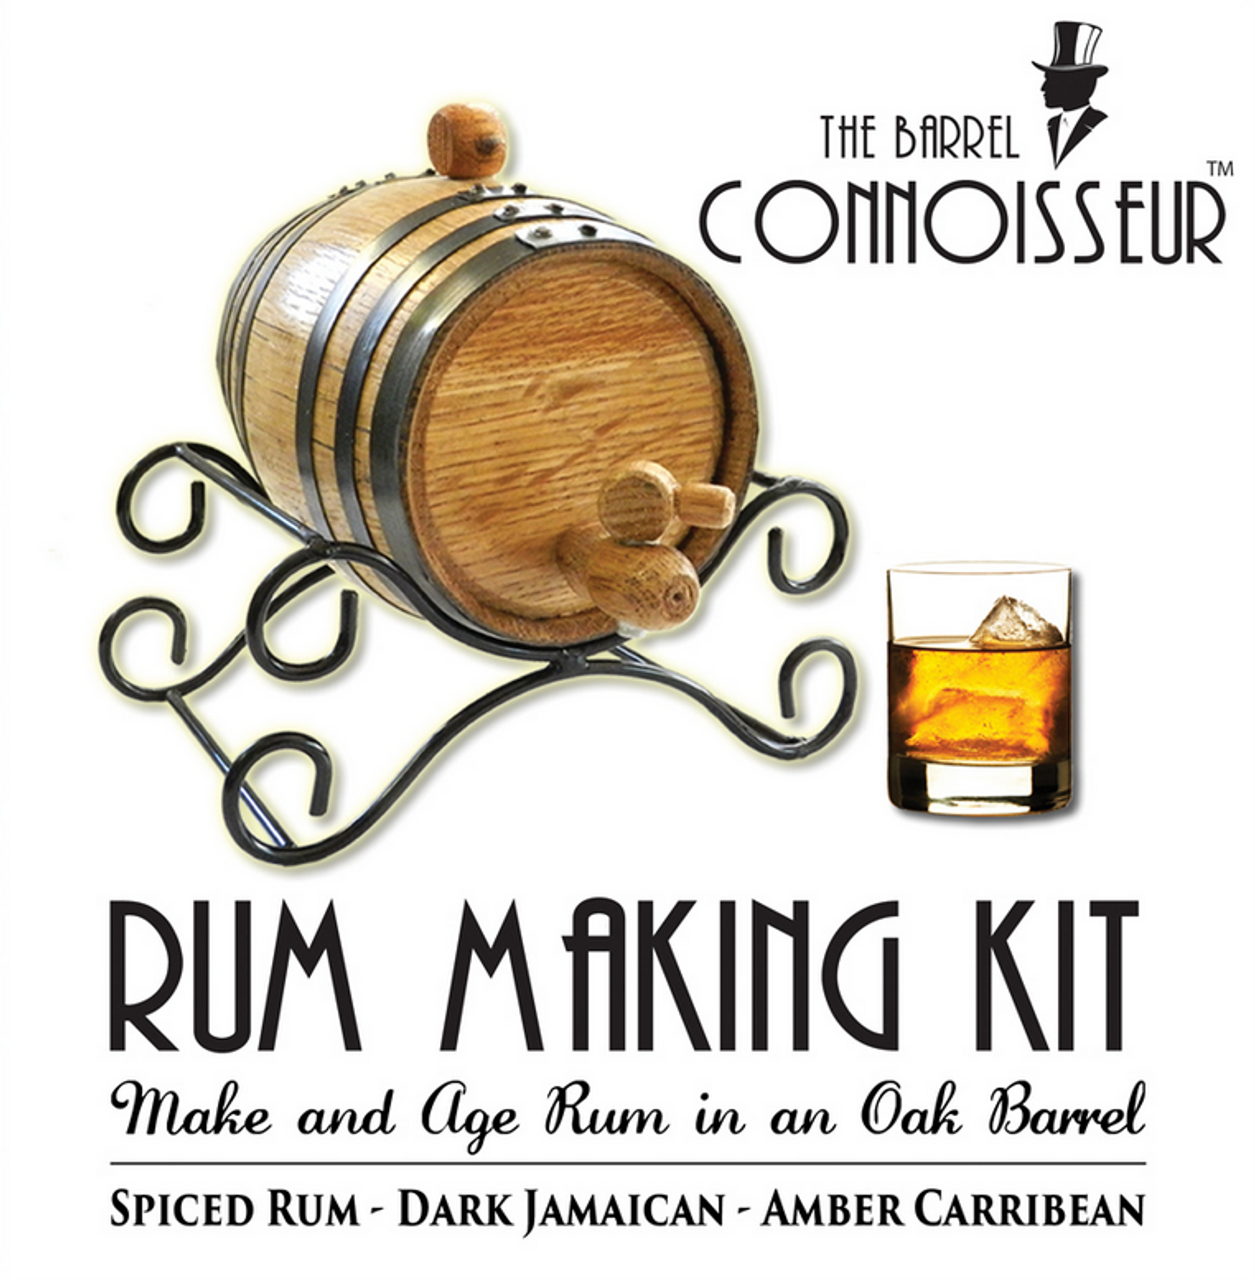 https://cdn11.bigcommerce.com/s-crhbihhq/images/stencil/1280x1280/products/121/583/Rum_making_Kit_1__60019.1696476703.PNG?c=2